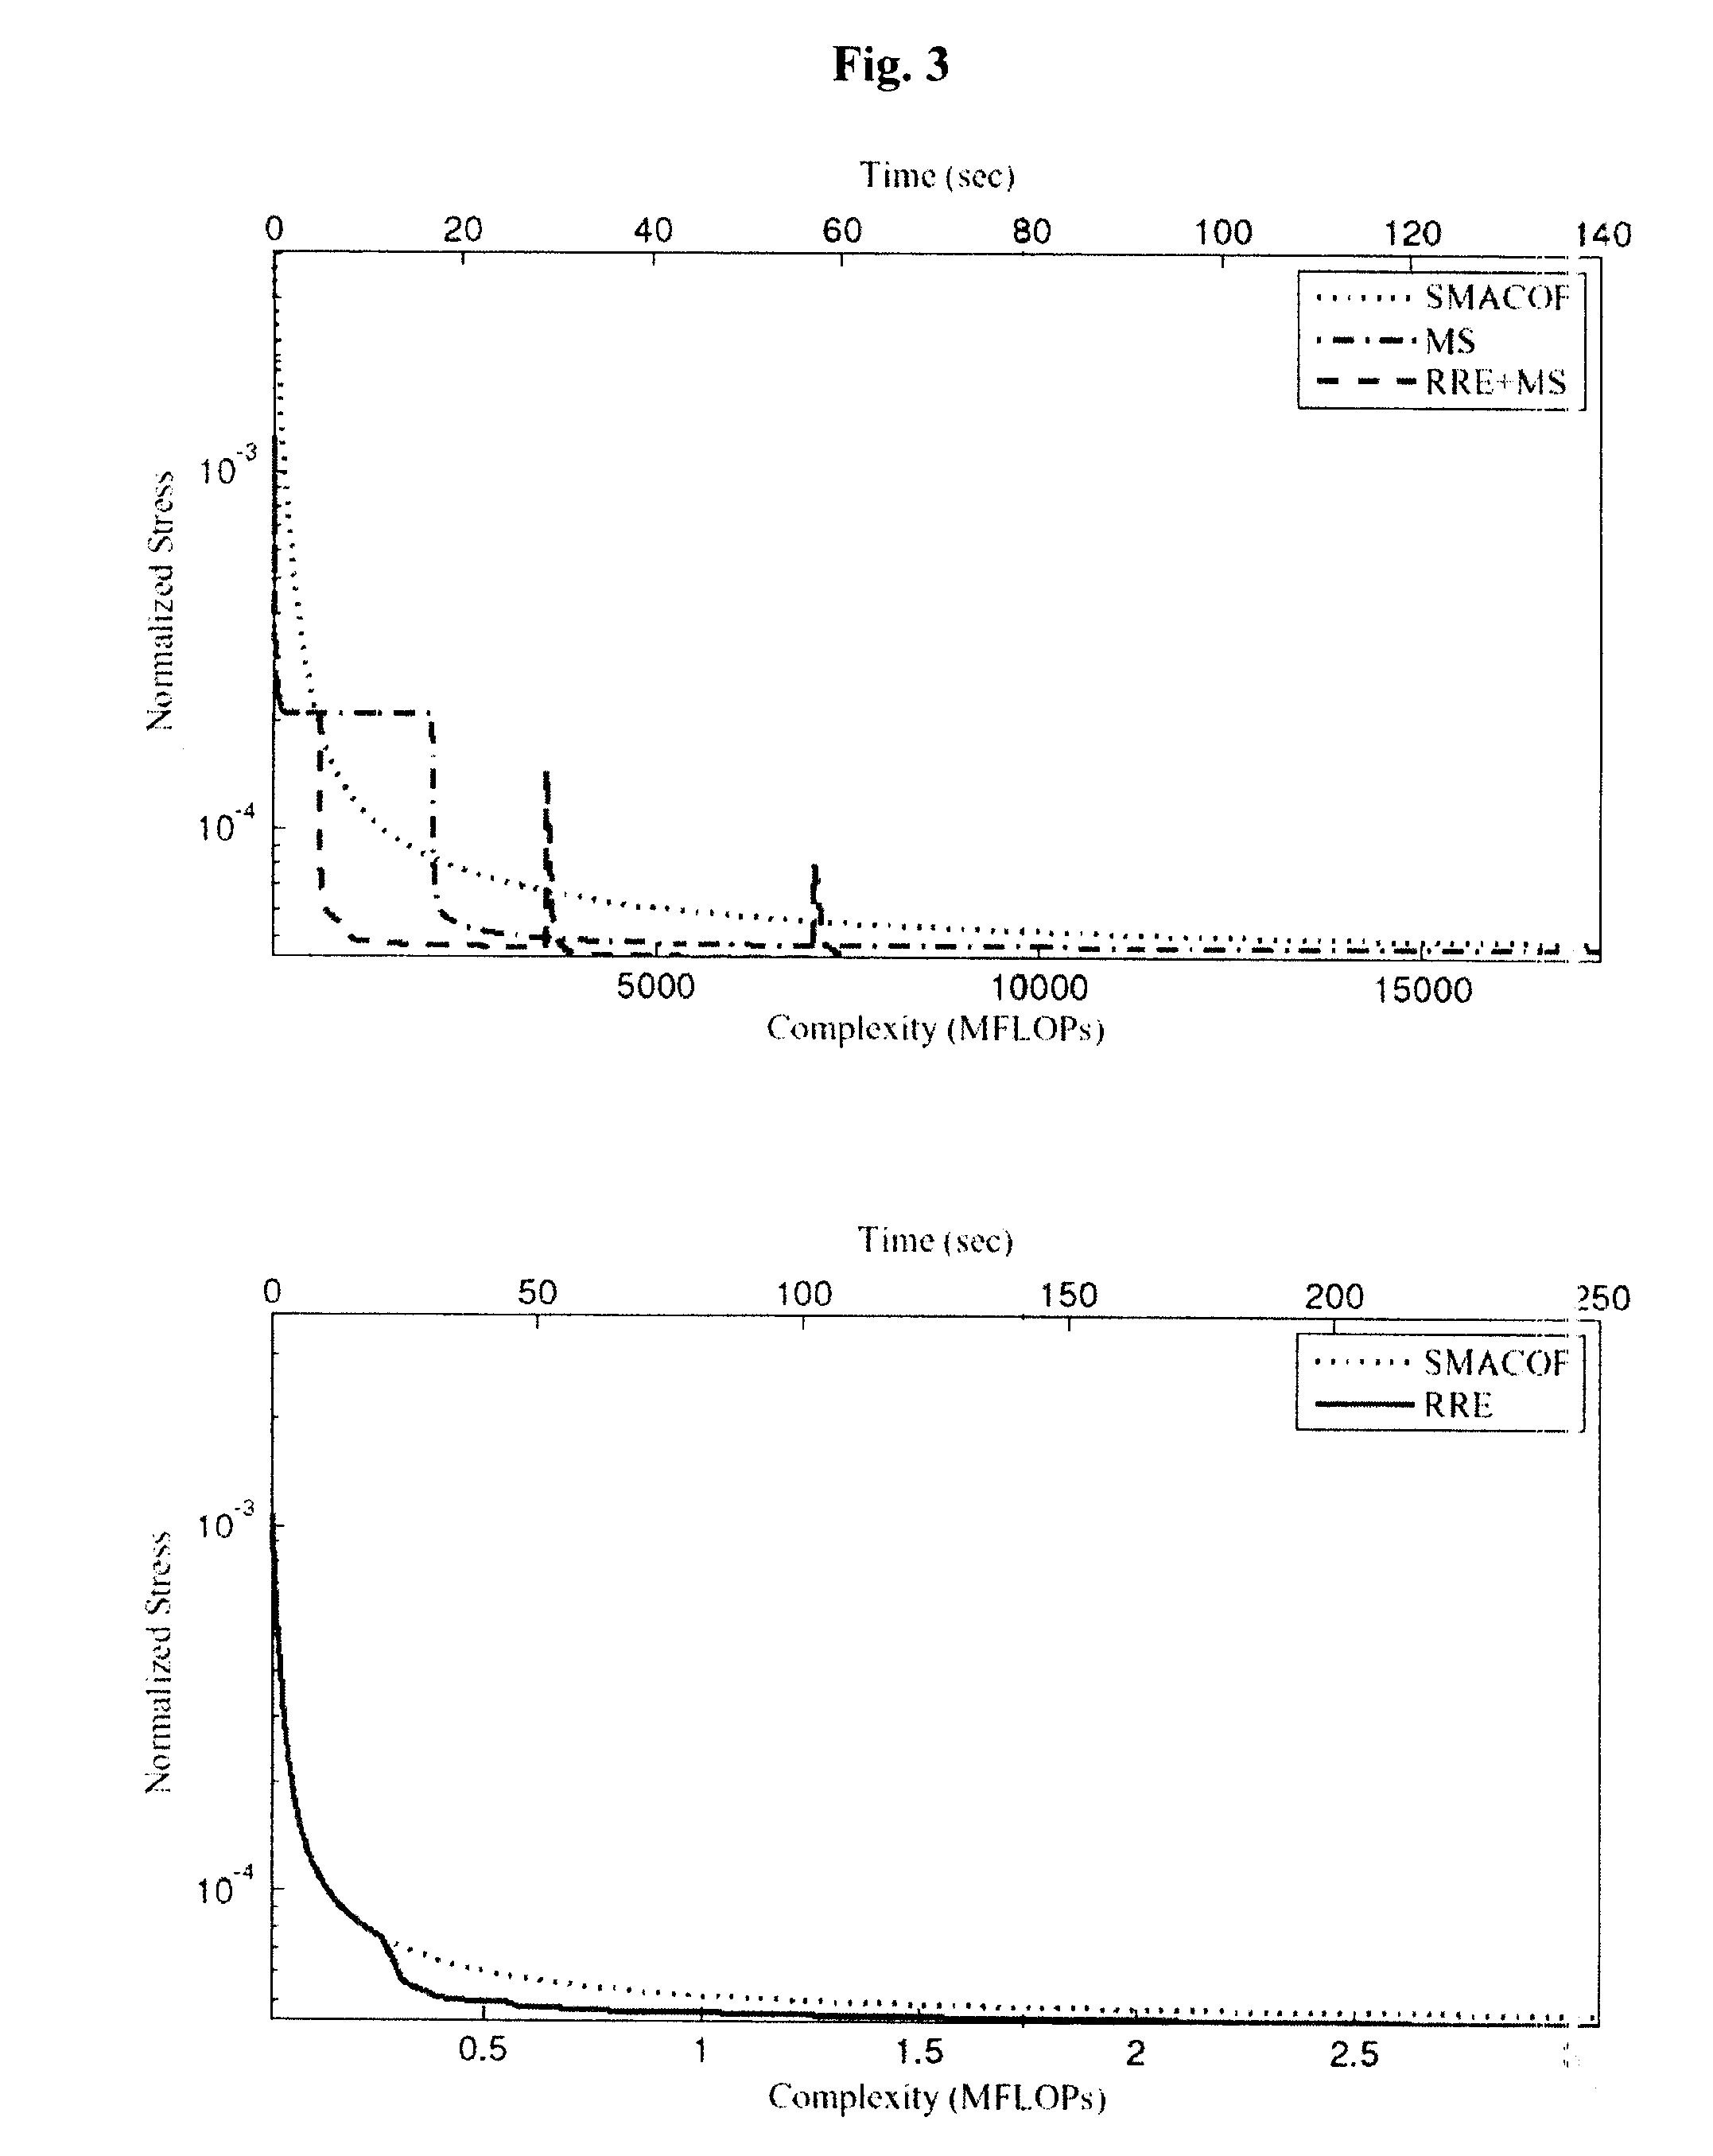 Acceleration of multidimensional scaling by vector extrapolation techniques